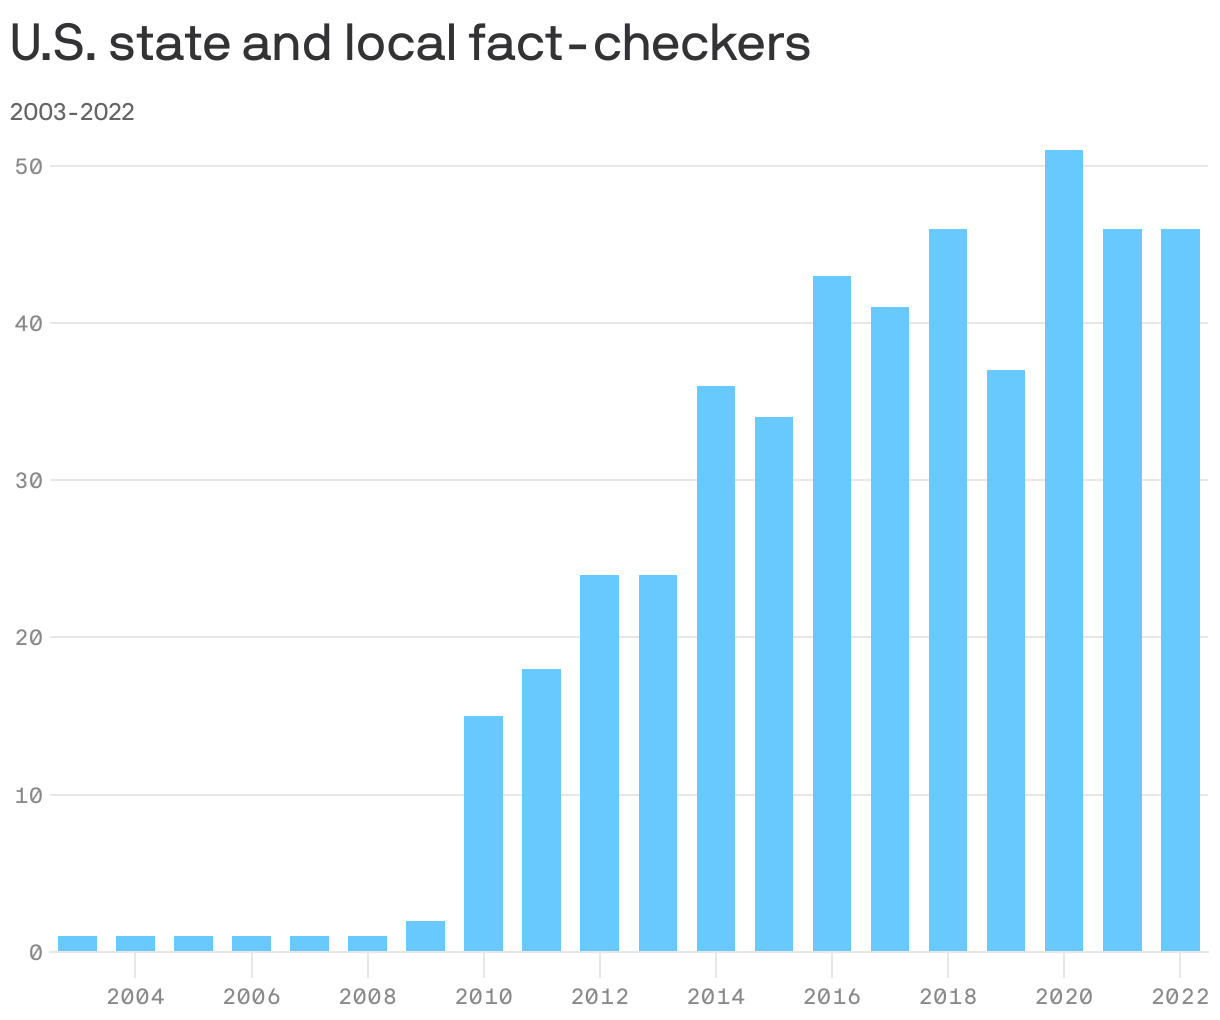 U.S. state and local fact-checkers